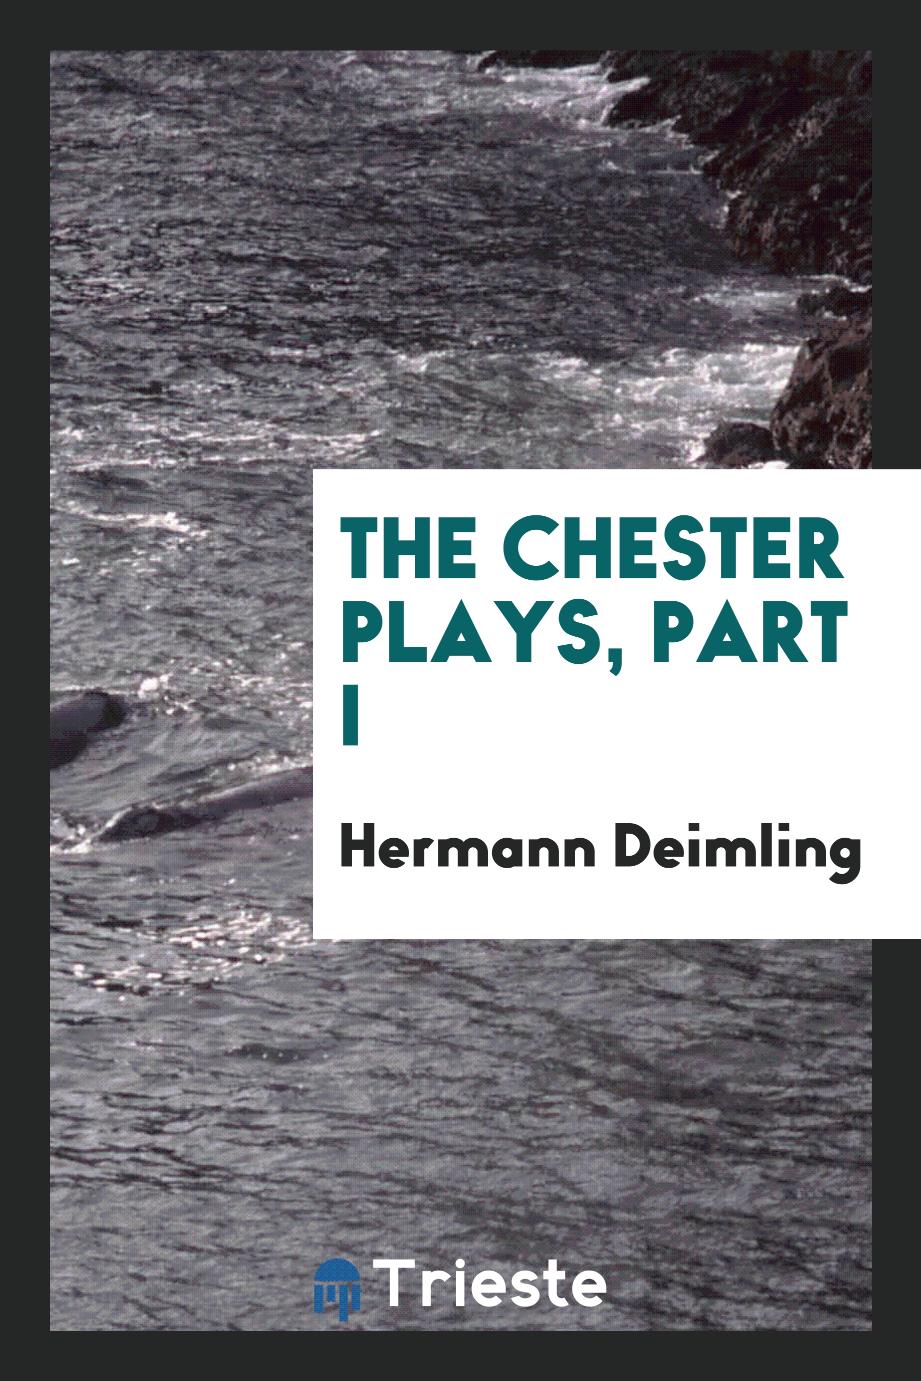 The Chester plays, Part I